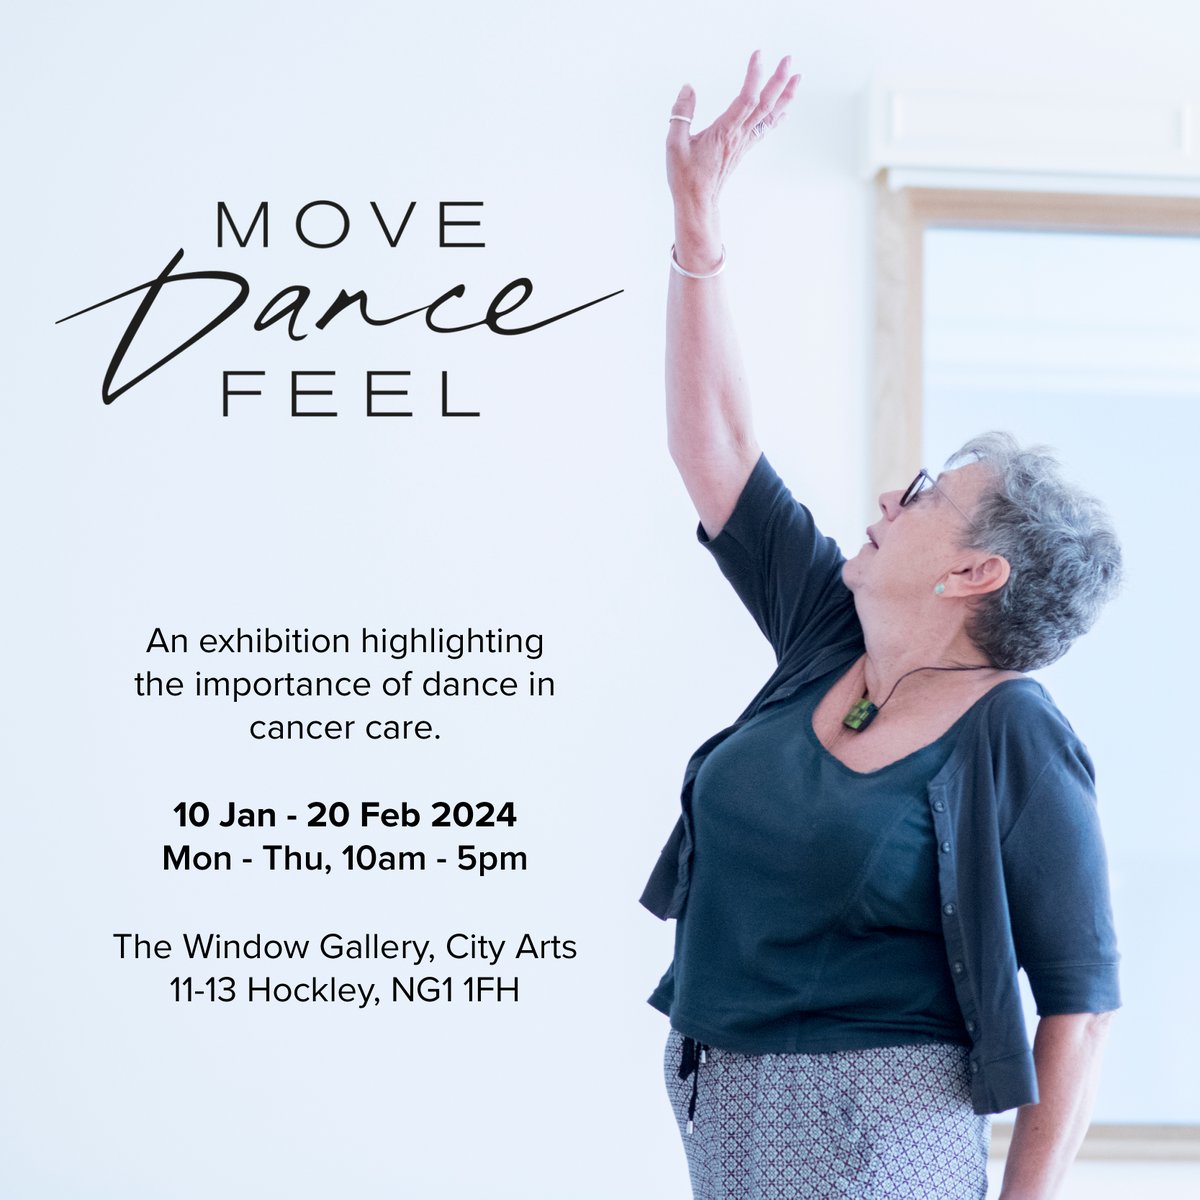 Starting today @MoveDanceFeel's exhibition highlighting the importance of dance in cancer care is the Window Gallery at City Arts.

📅 10 Jan - 20 Feb 2024
🕙 Mon - Thu, 10am - 5pm
🔗 Find out more: city-arts.org.uk/event/22012/mo…